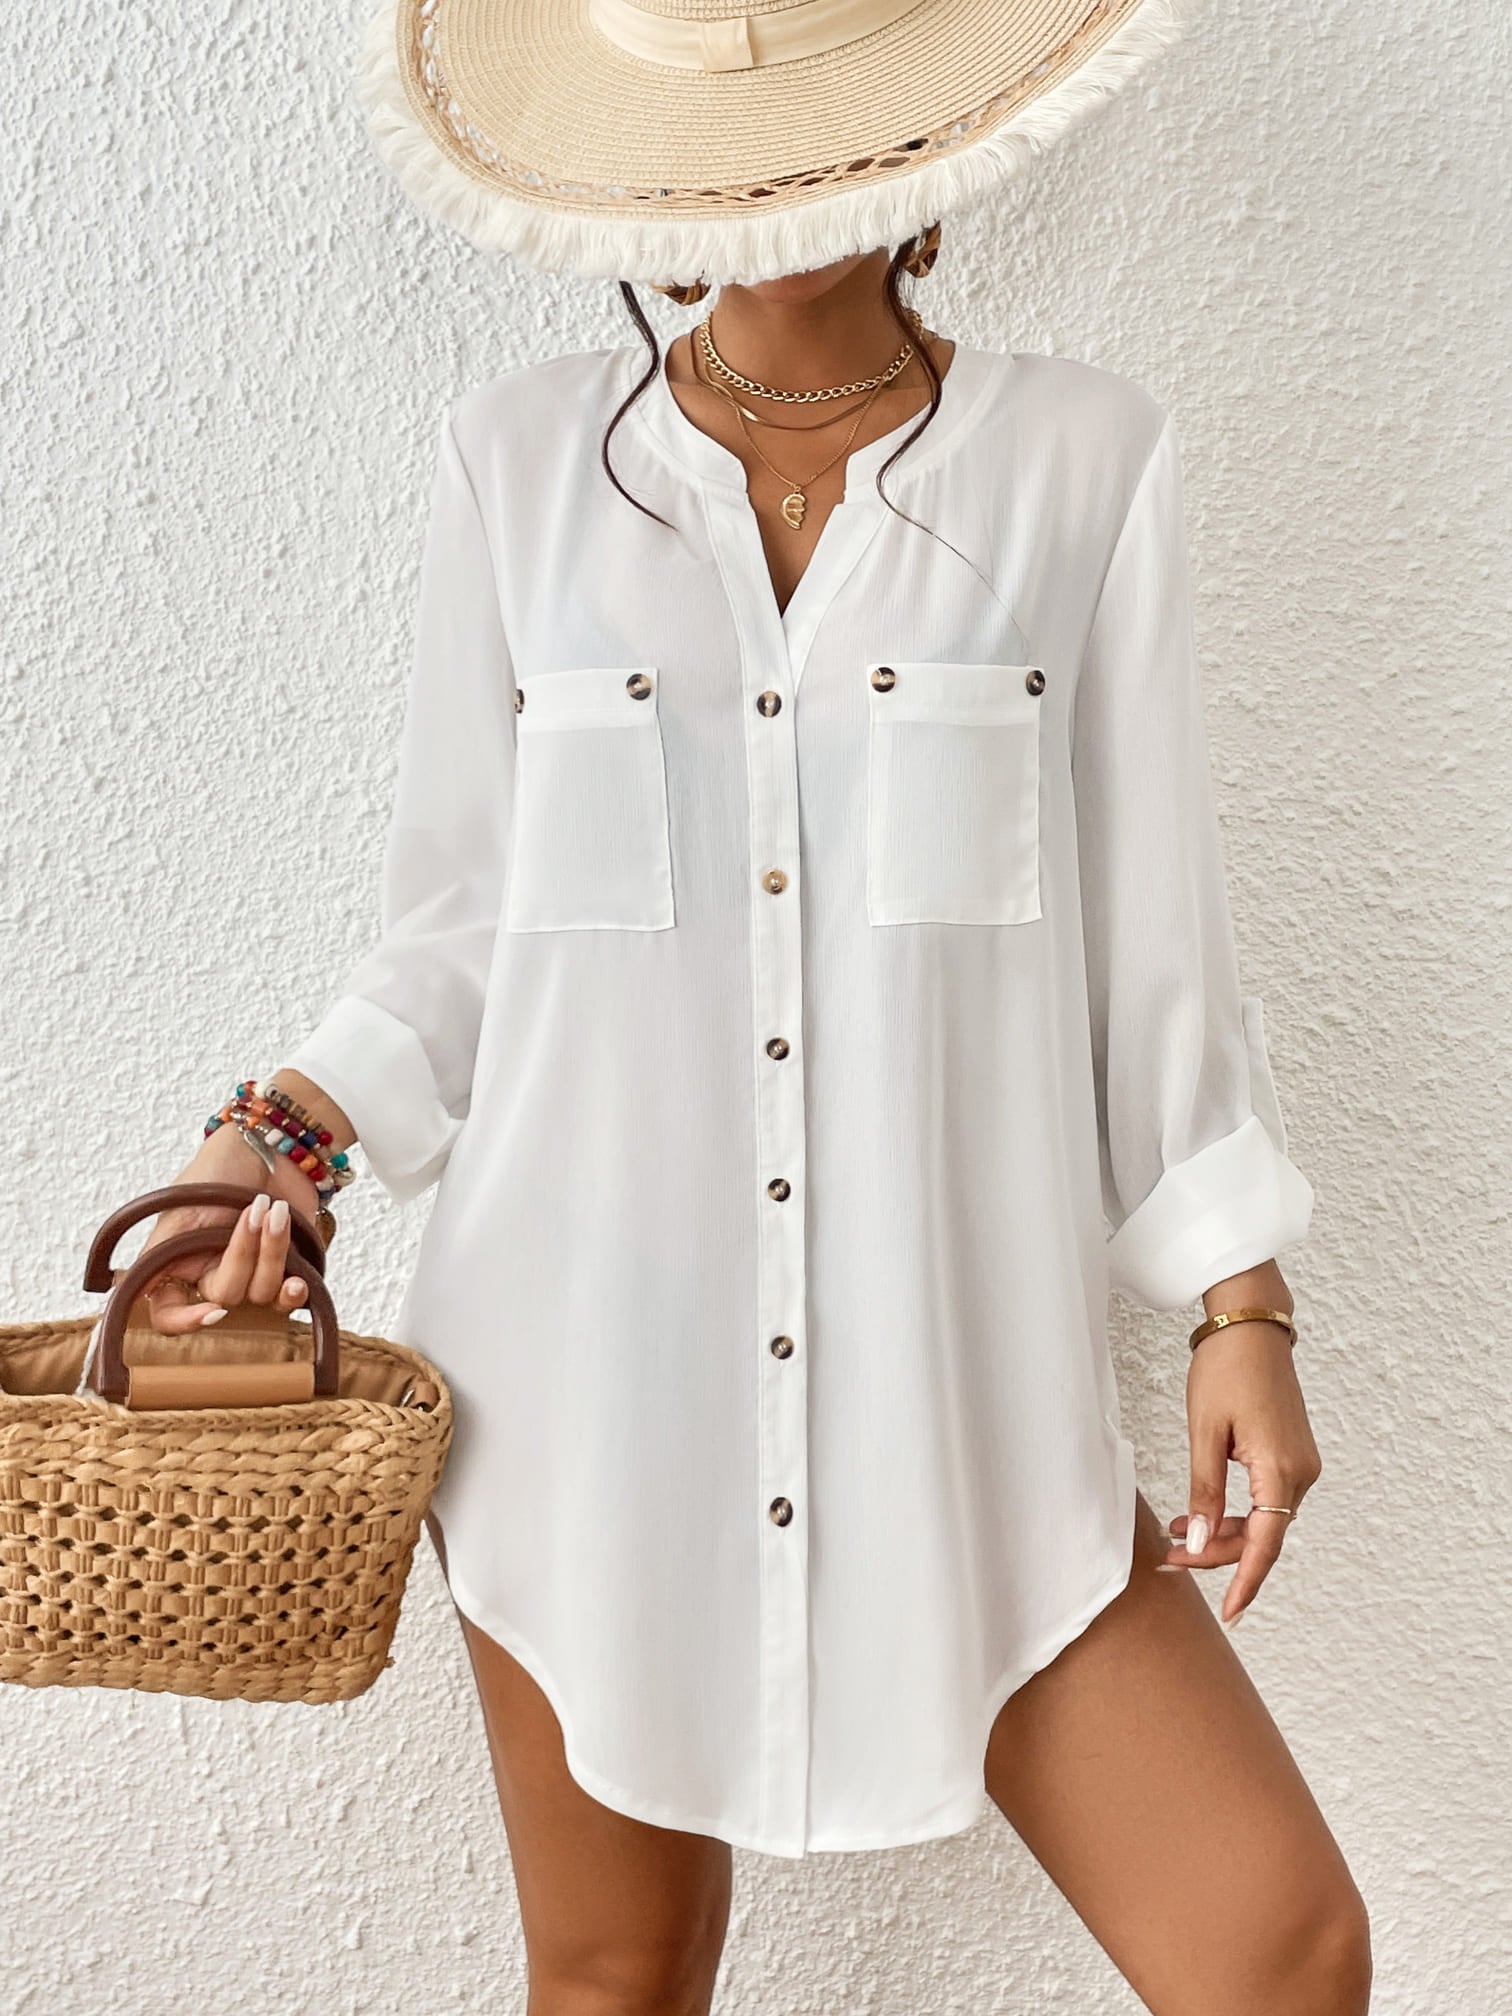 Womens Cotton Button Down Long Sleeve Shirts Bathing Suit Cover